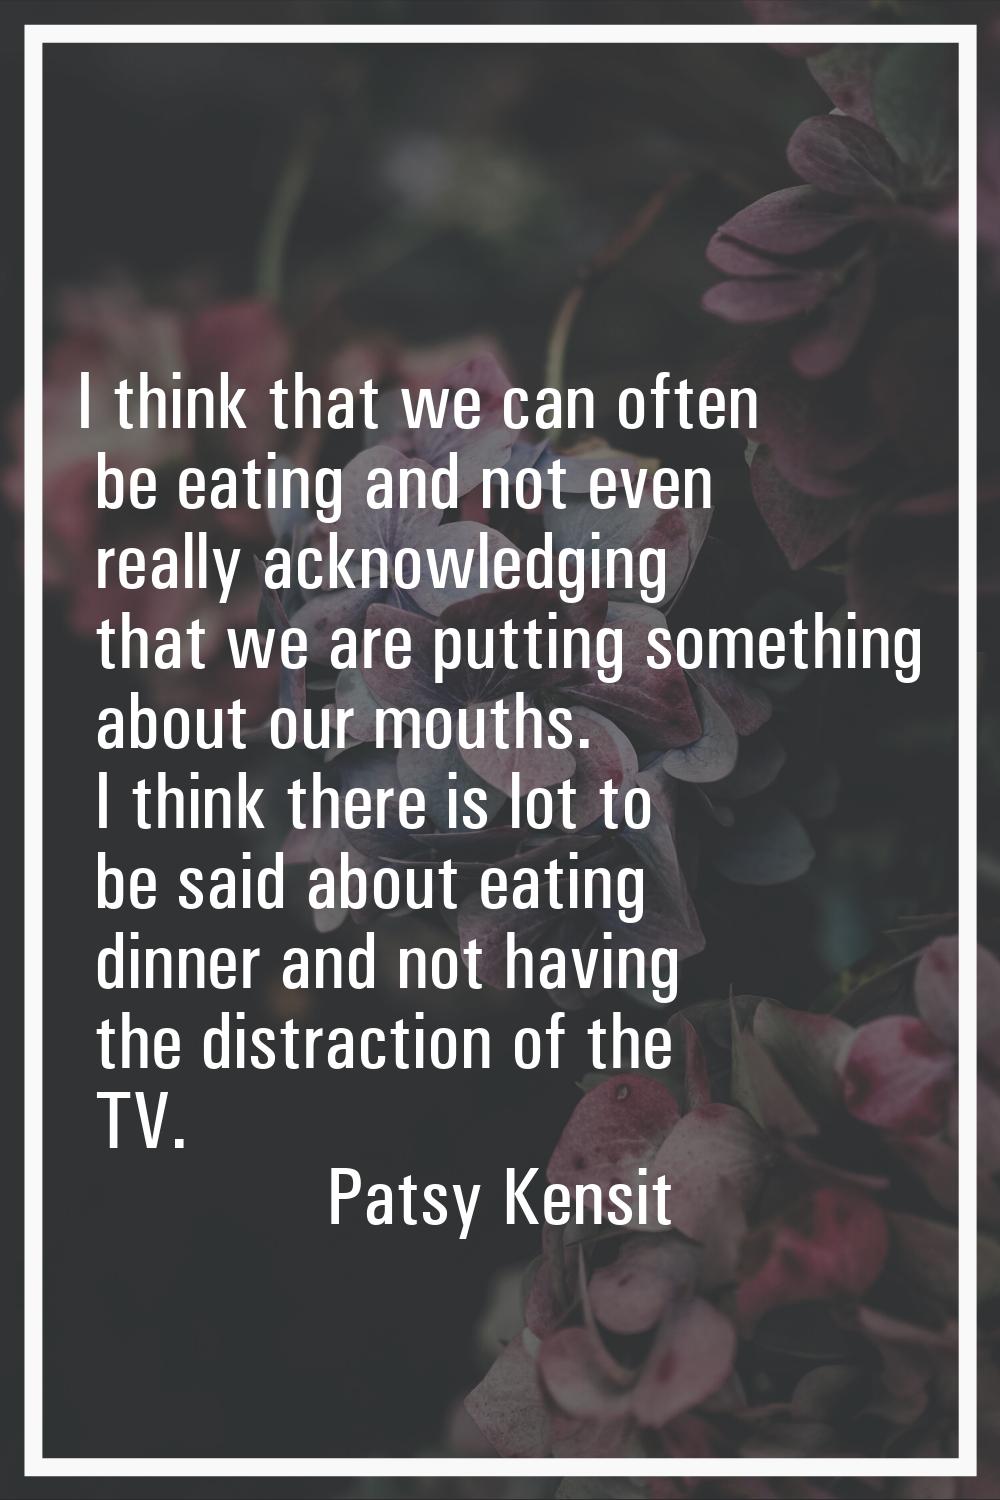 I think that we can often be eating and not even really acknowledging that we are putting something